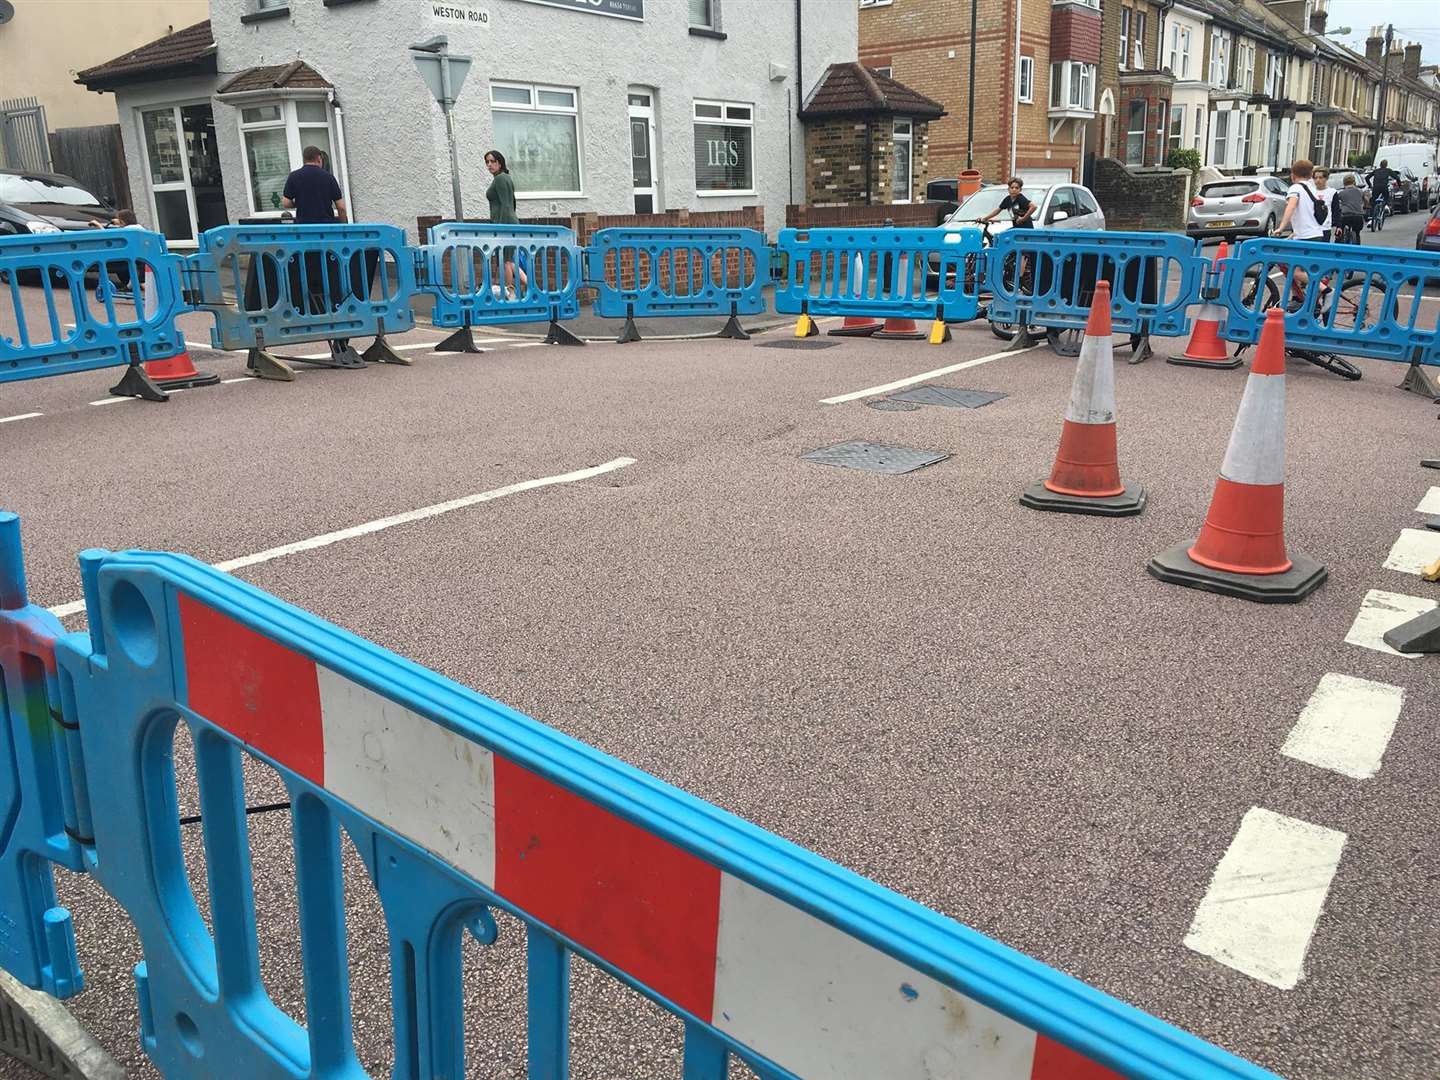 The junction of Weston Road and Bryant Road in Strood is closed due to a potential sink hole (13628353)